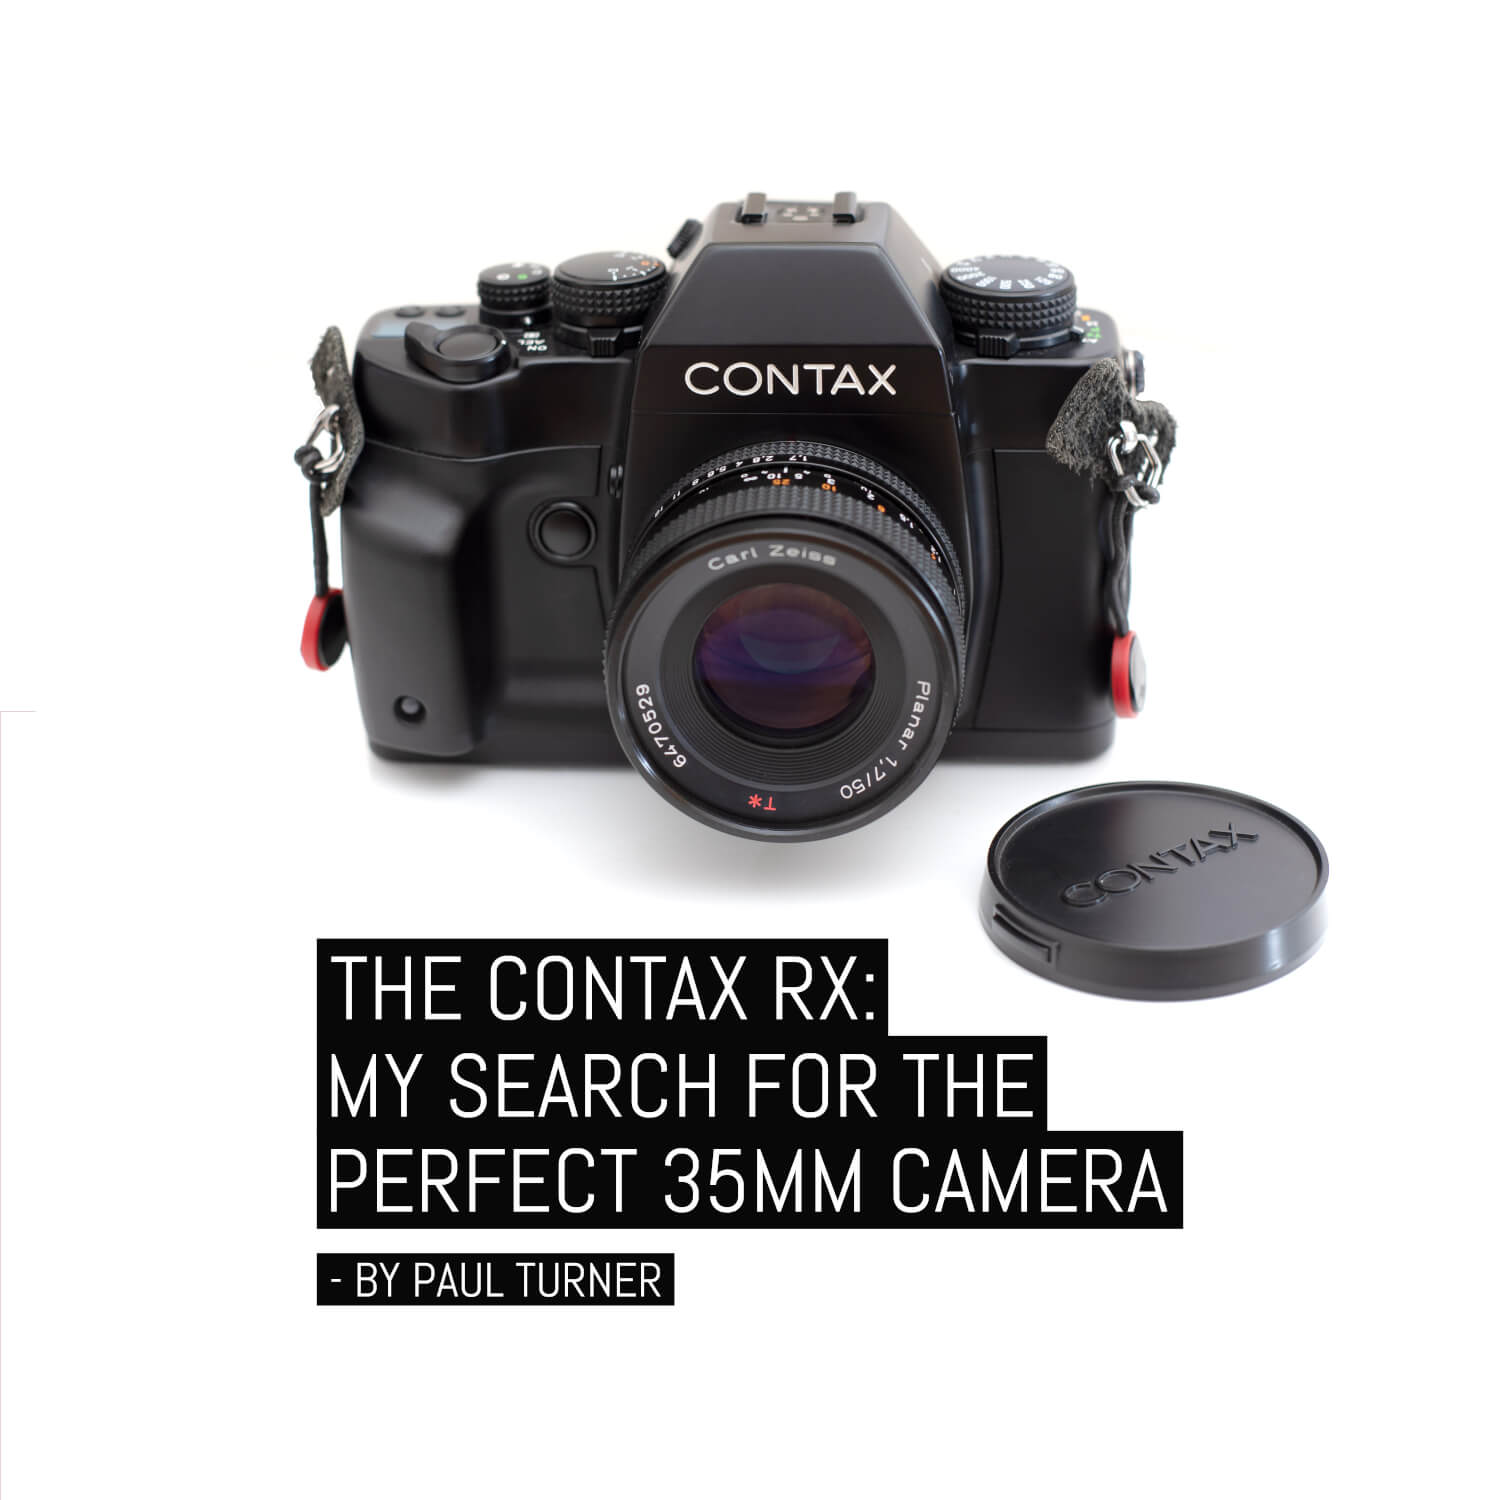 The Contax RX: My search for the perfect camera